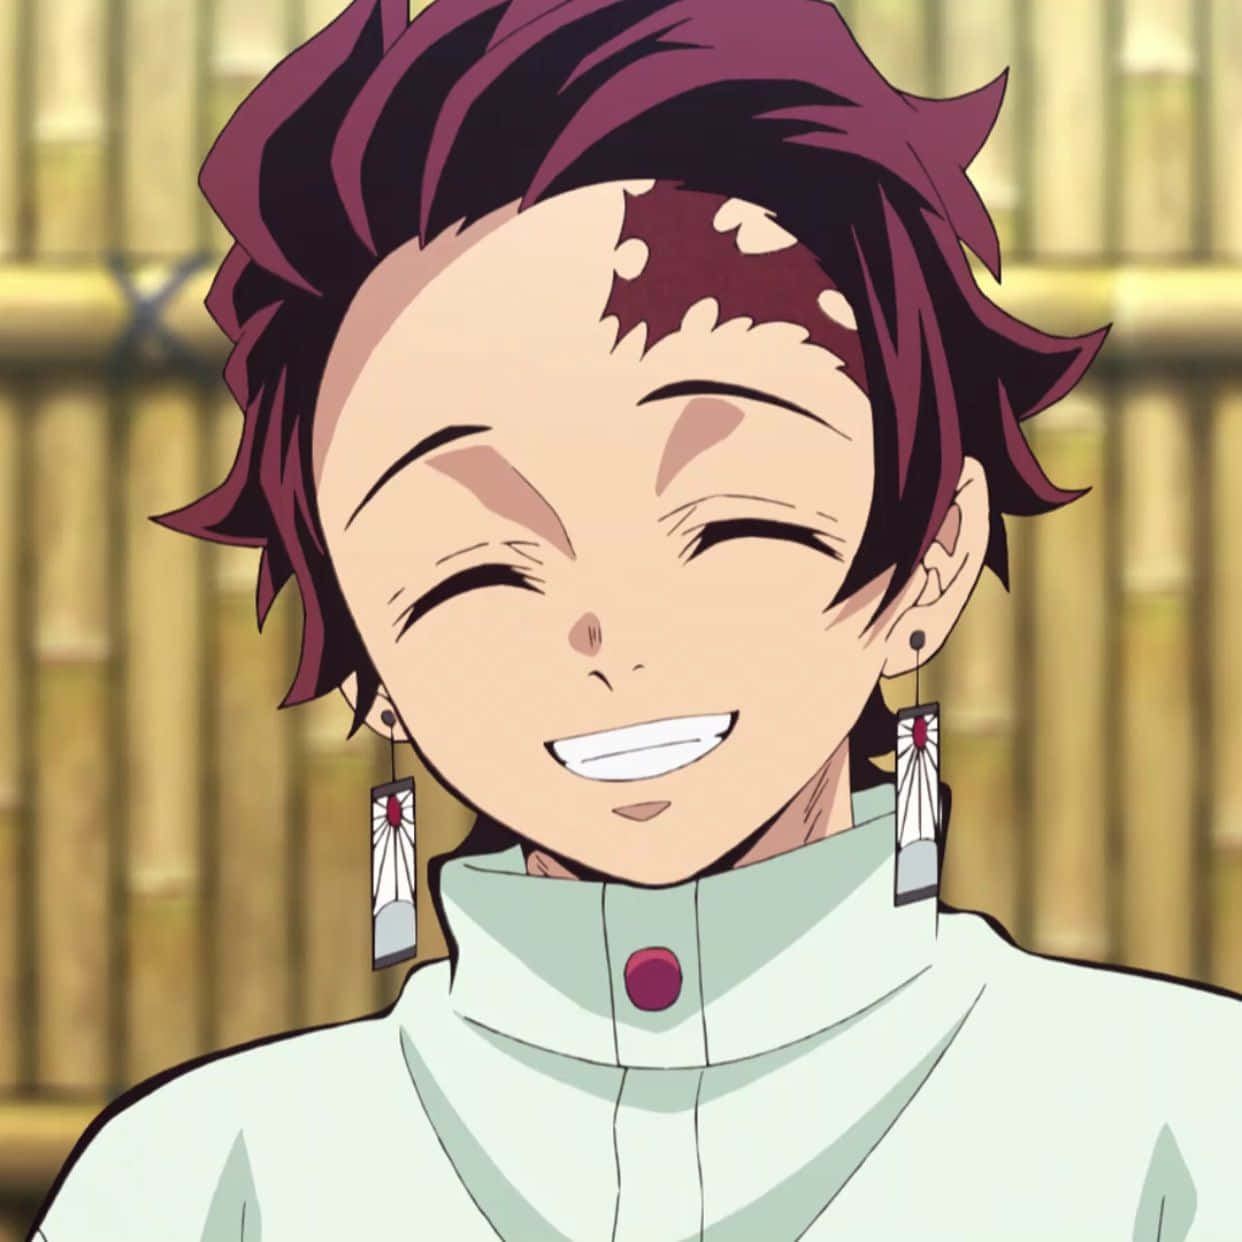 A Girl With Red Hair And Earrings Is Smiling